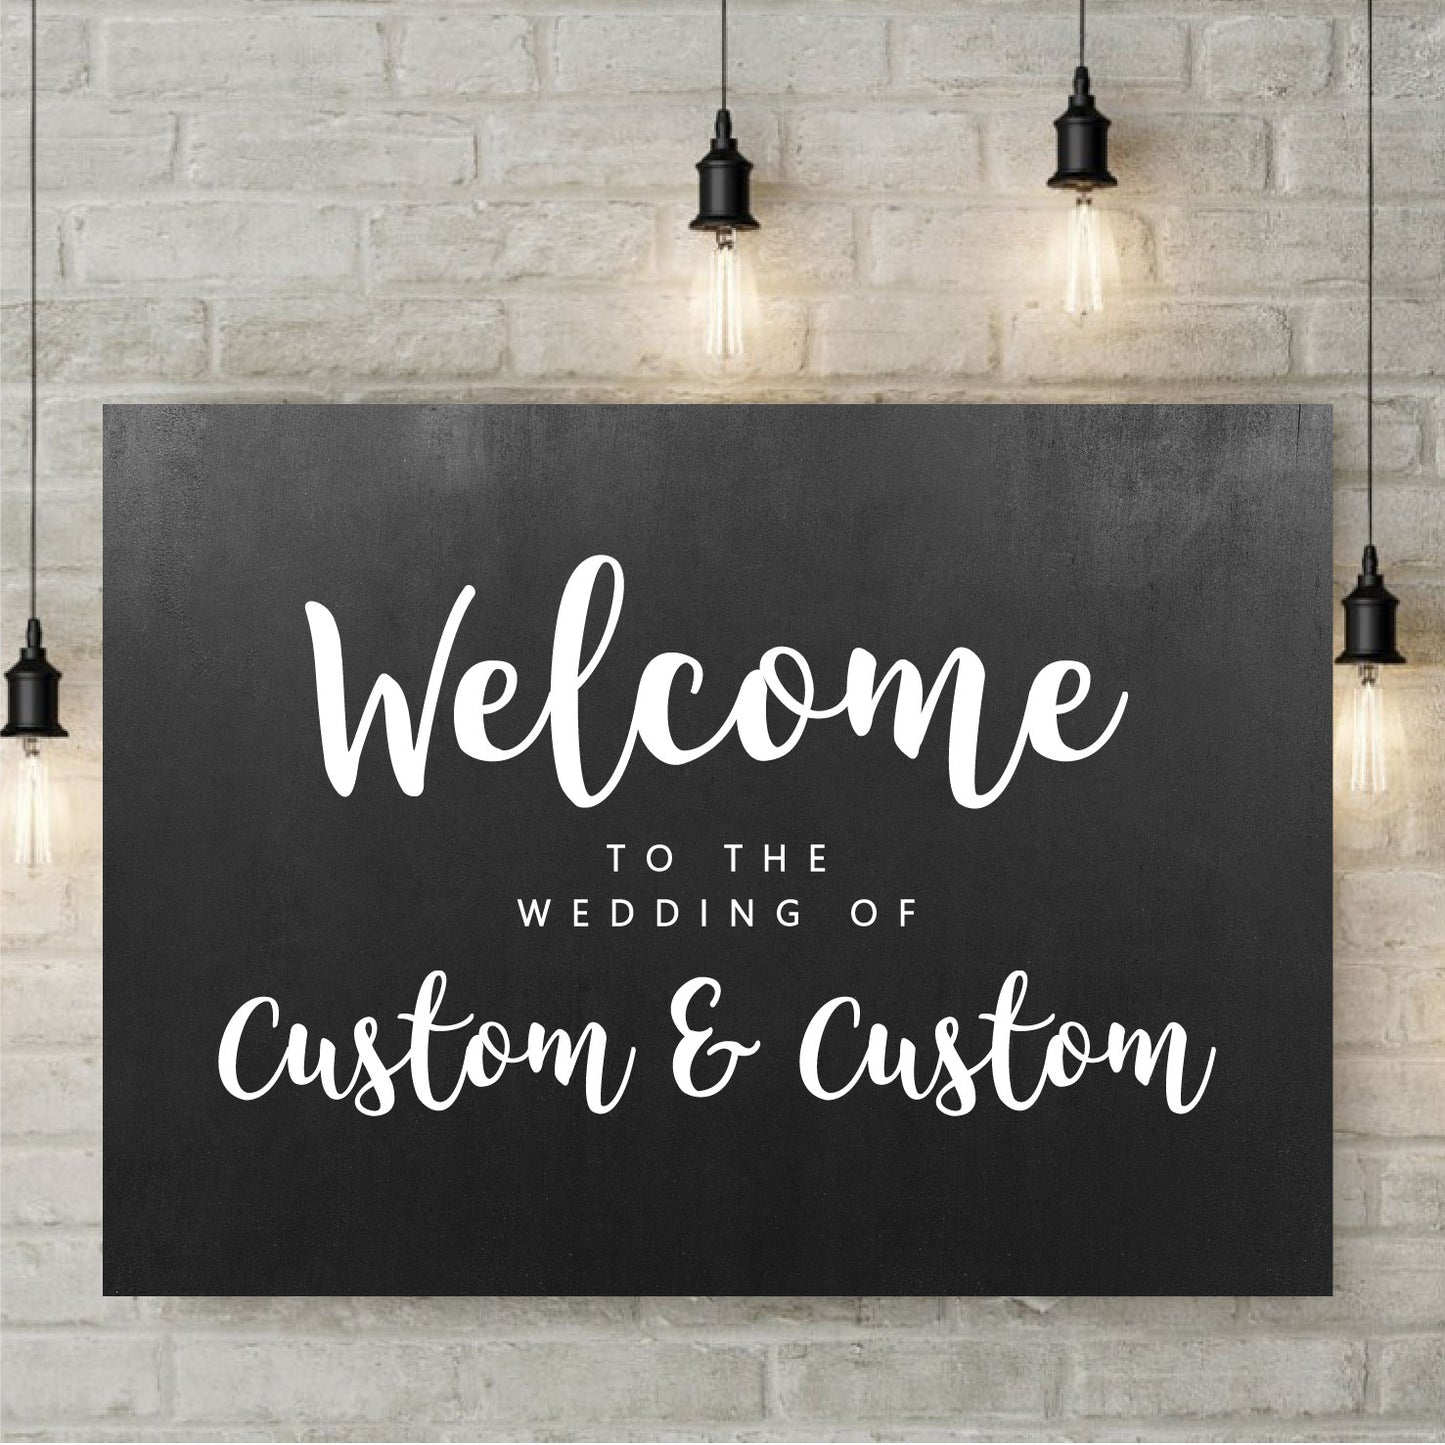 Custom Vinyl Welcome Decal Wedding Sign - Welcome To The Wedding Of